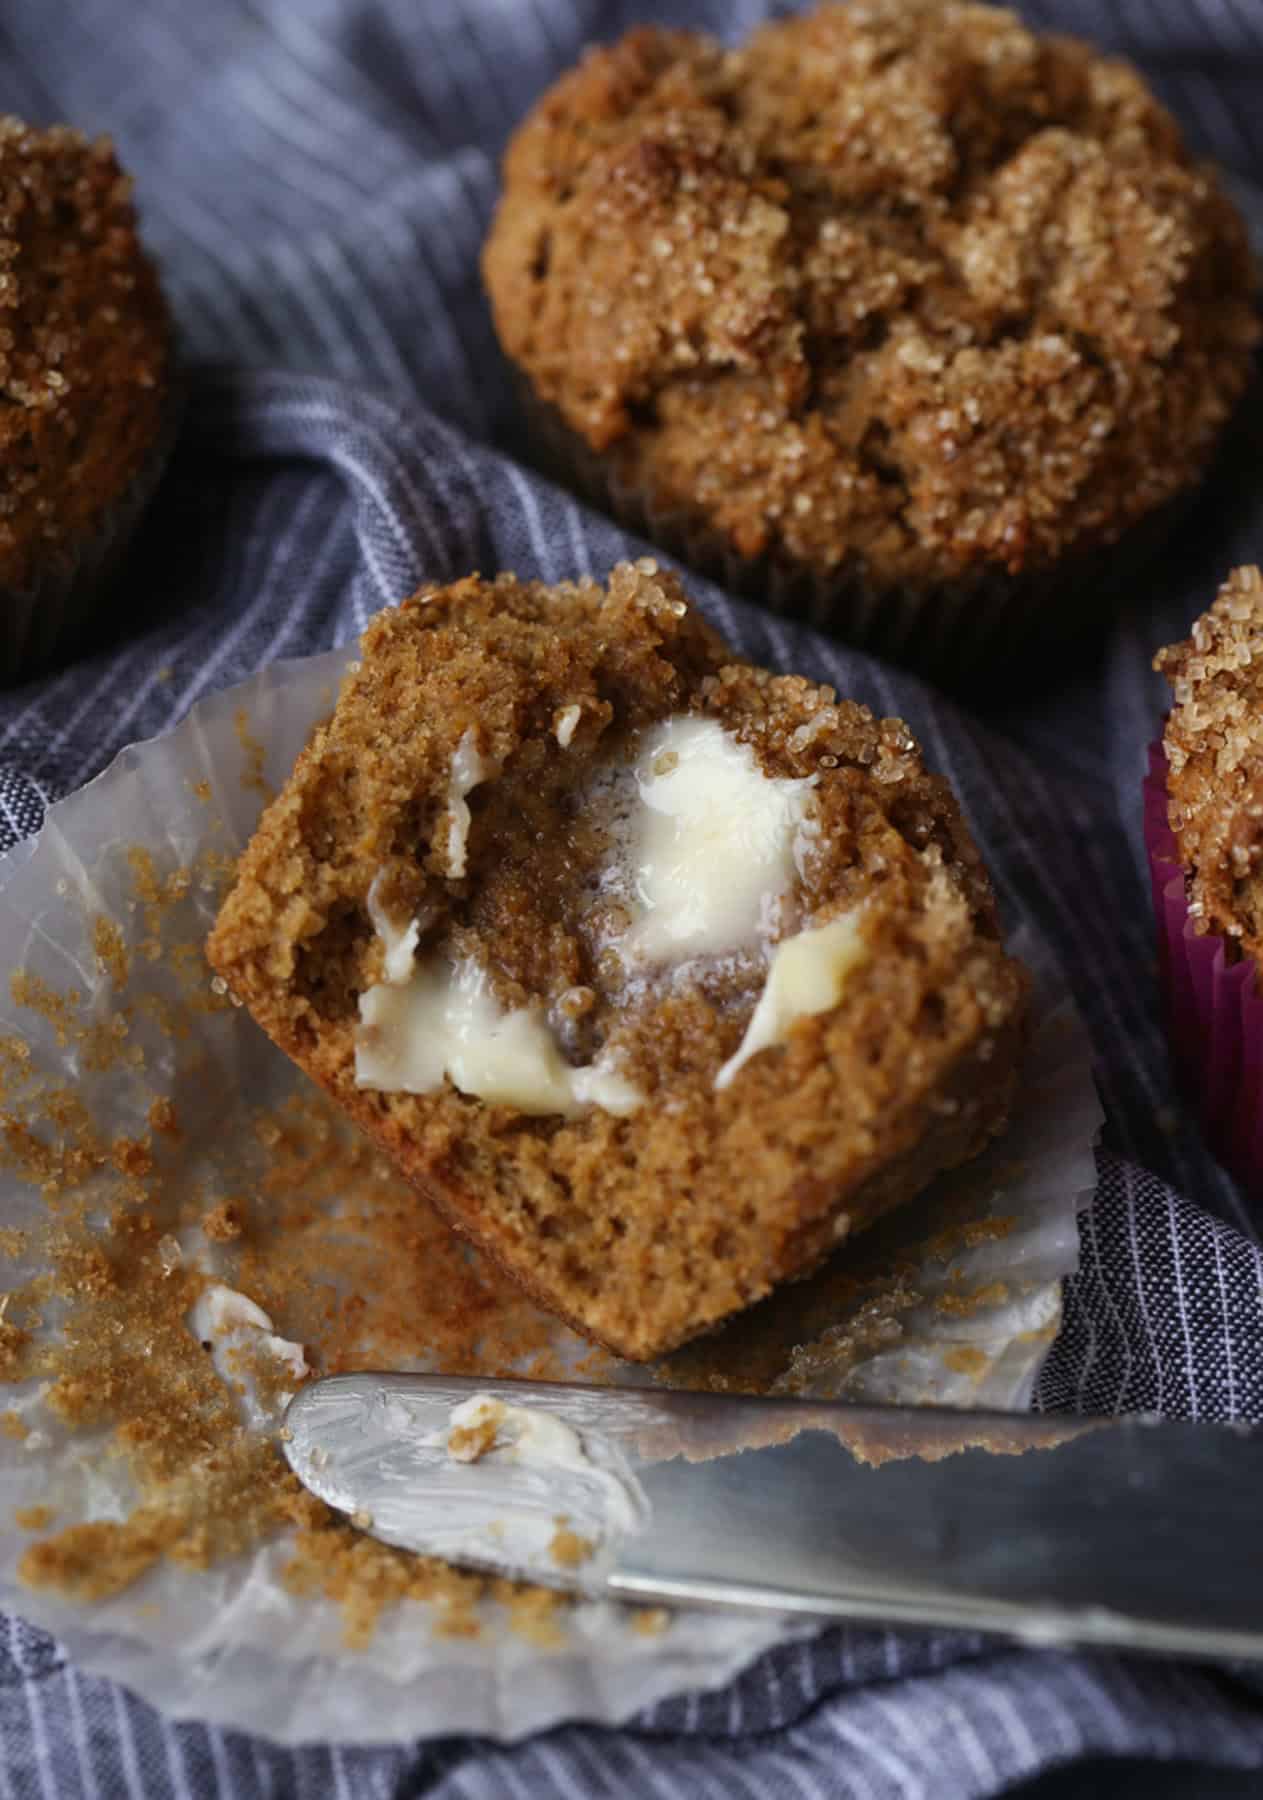 One half of a bran muffin spread with butter next to the tip of a butter knife and a whole muffin.